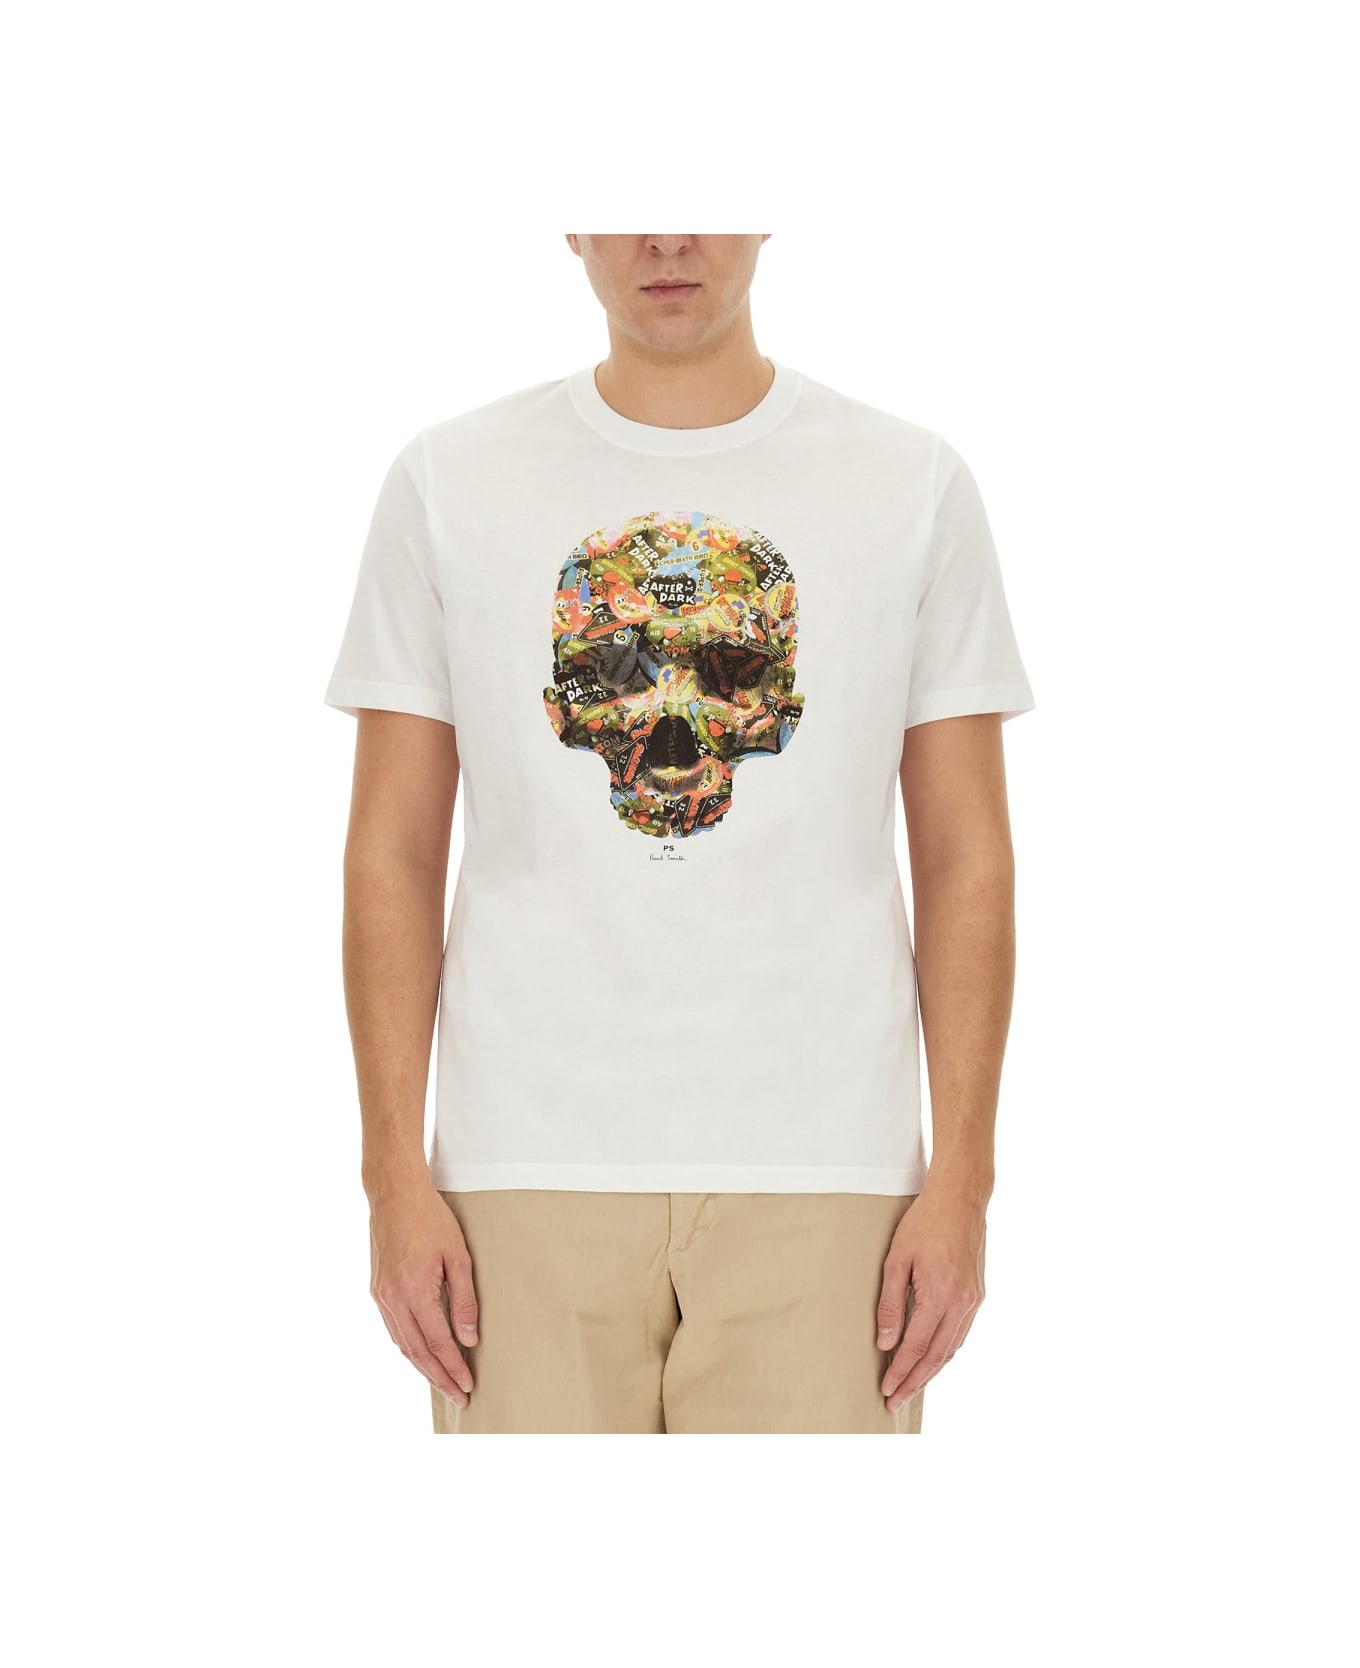 PS by Paul Smith Skull Print T-shirt - WHITE シャツ